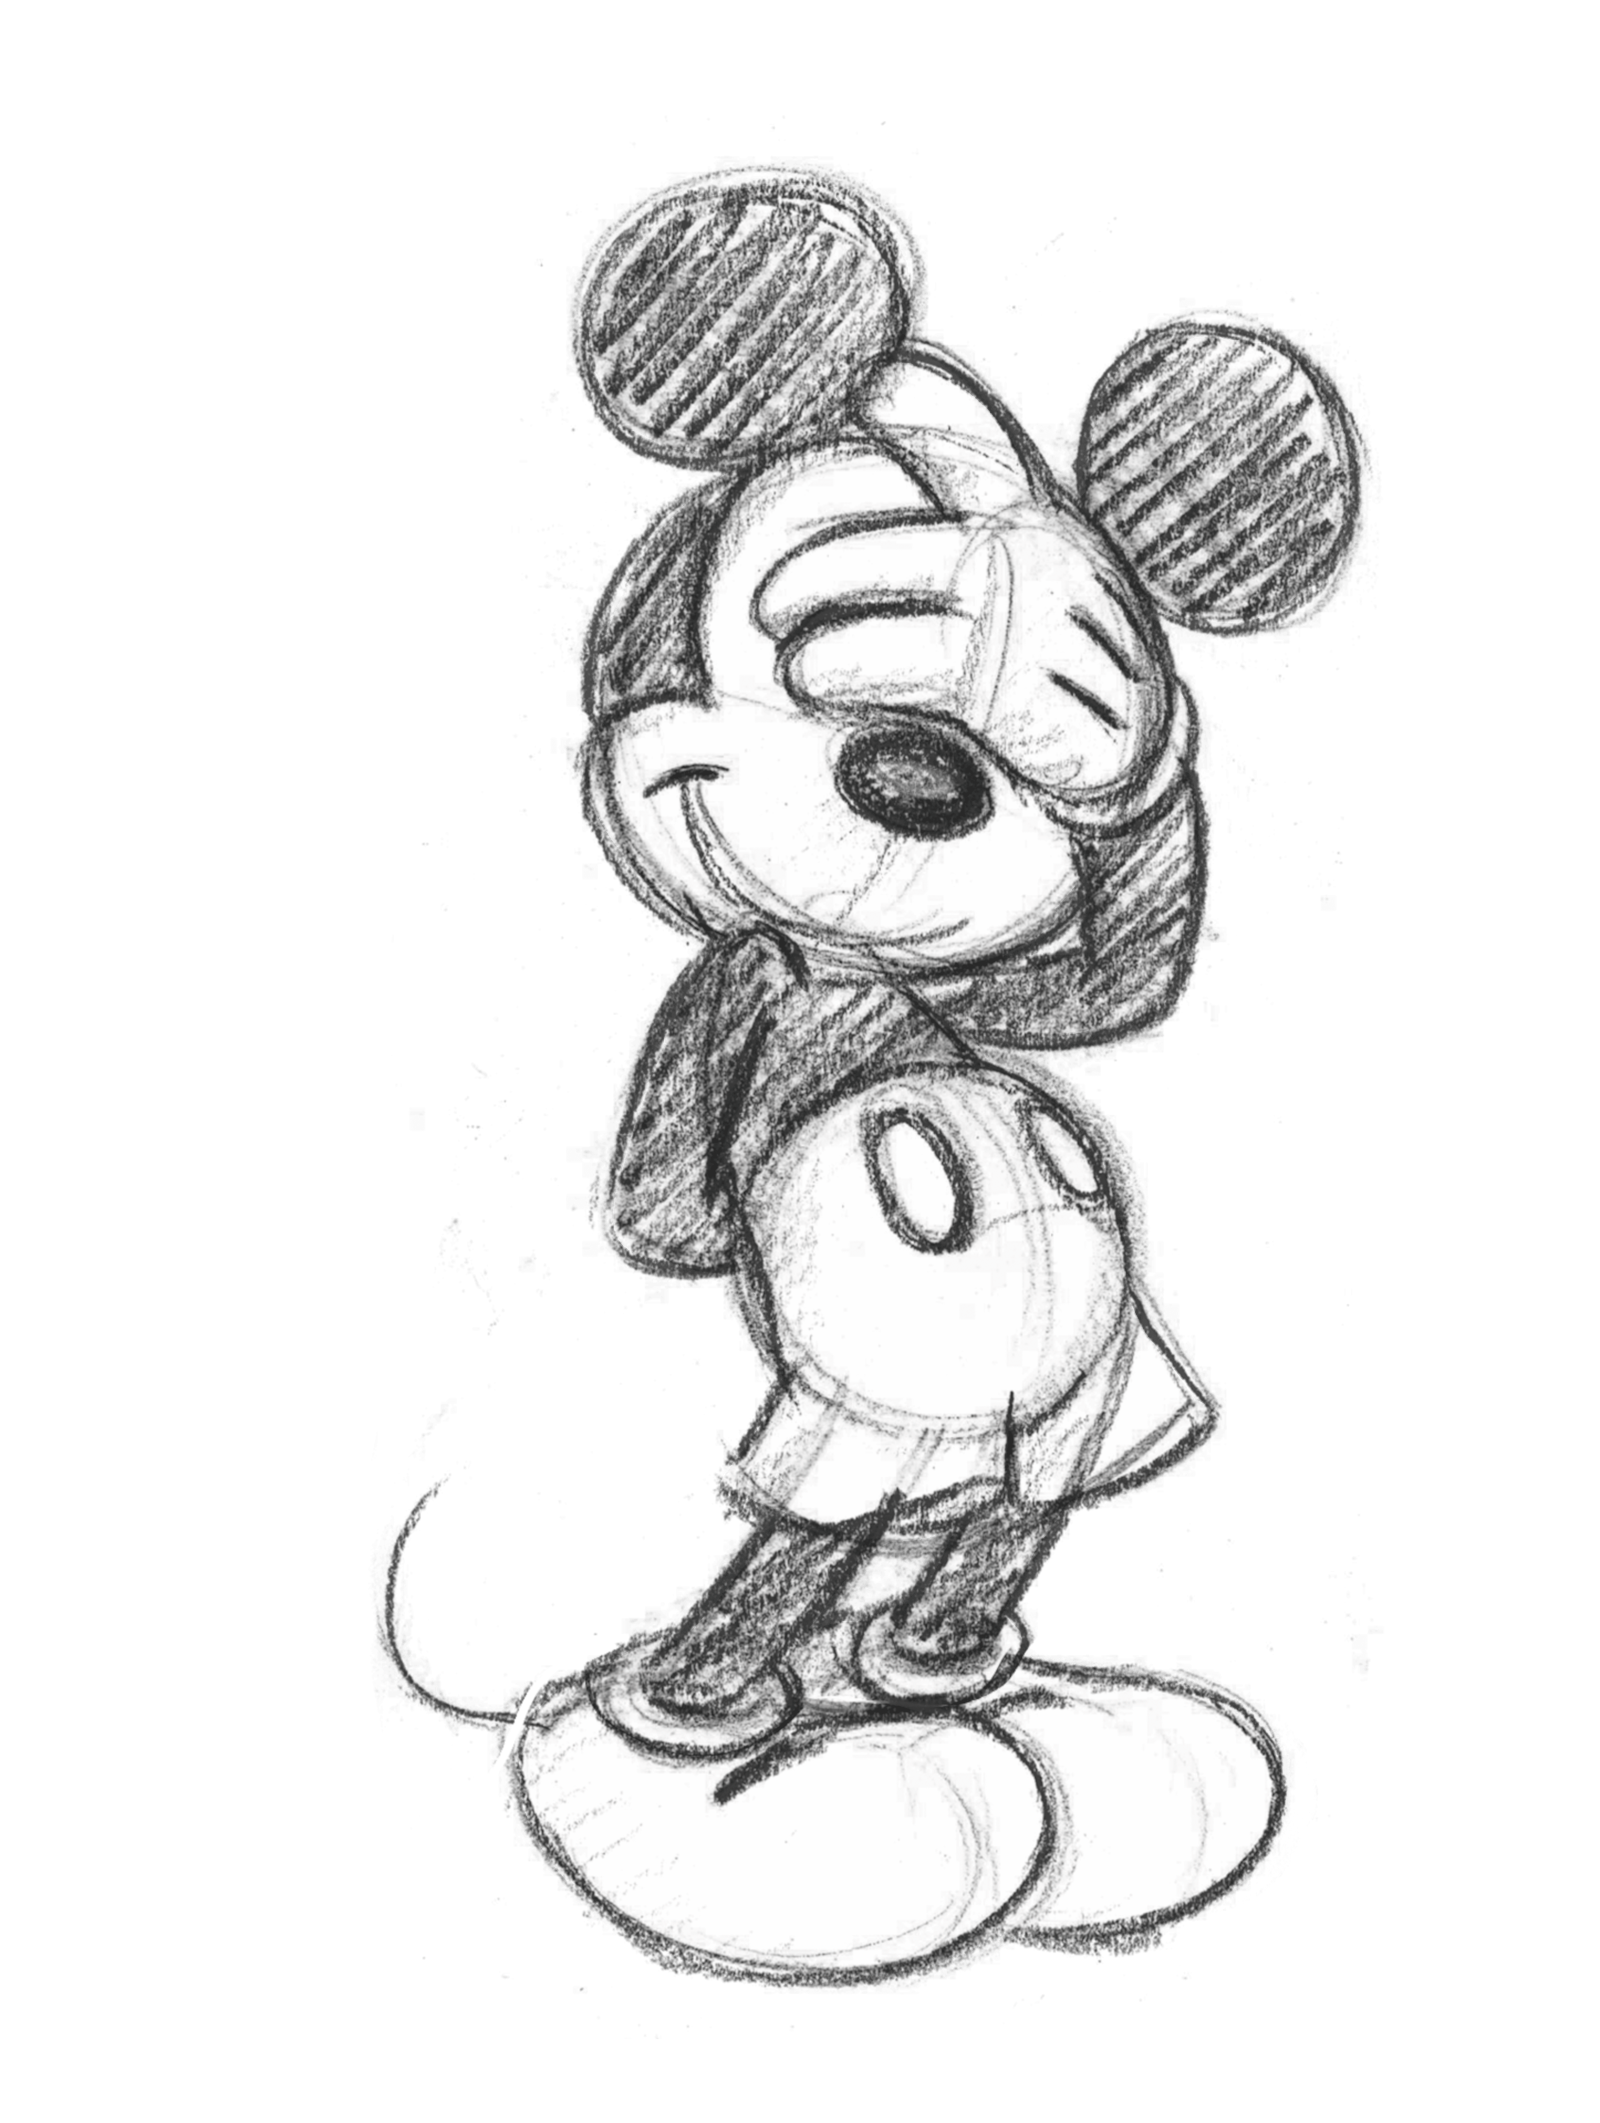 An animated GIF of Mickey Mouse peeking up, then sliding down a rope.